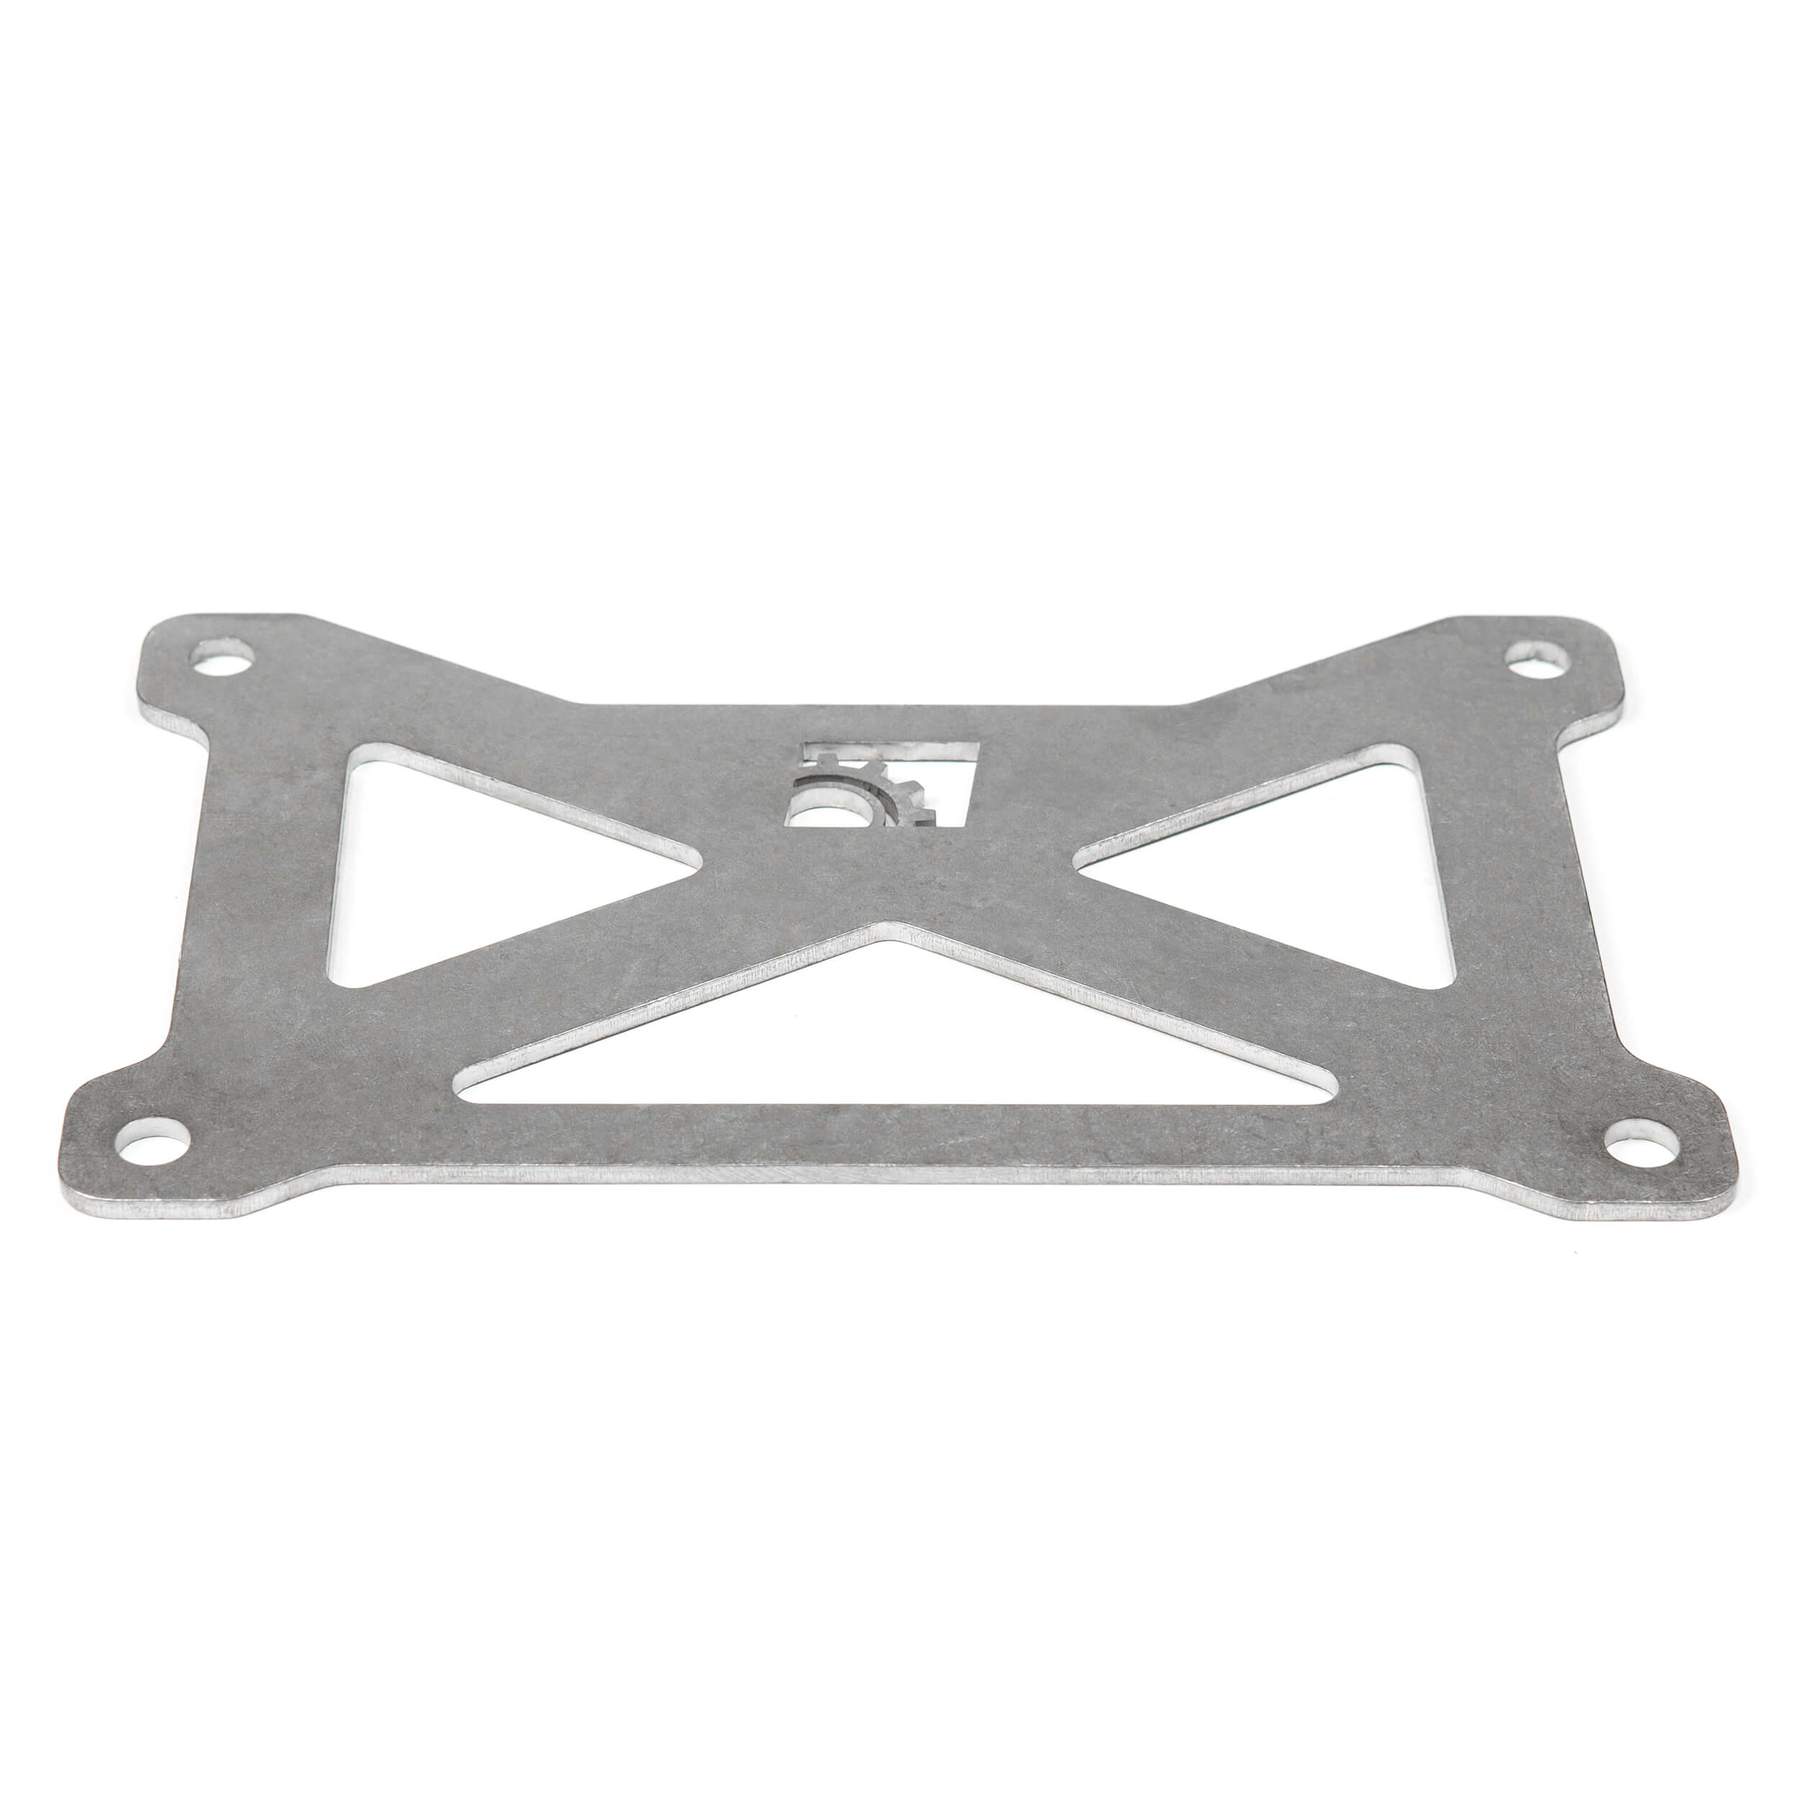 BuiltRight Industries Dash Mount Support Plate Interior Accessory BuiltRight Industries